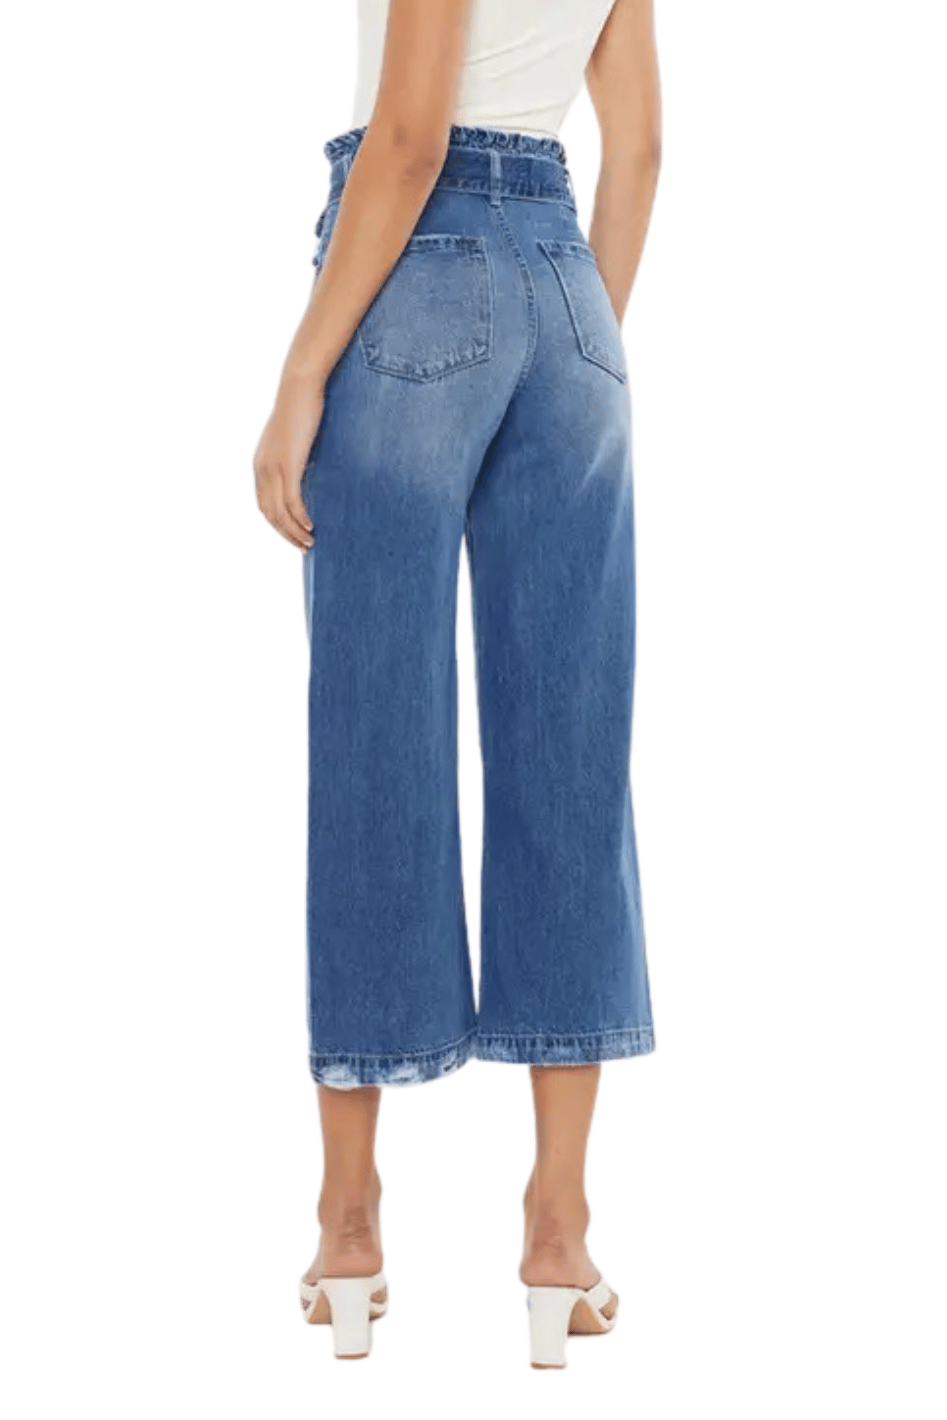 Serenity Ultra High Rise Jeans - Expressive Collective CO.